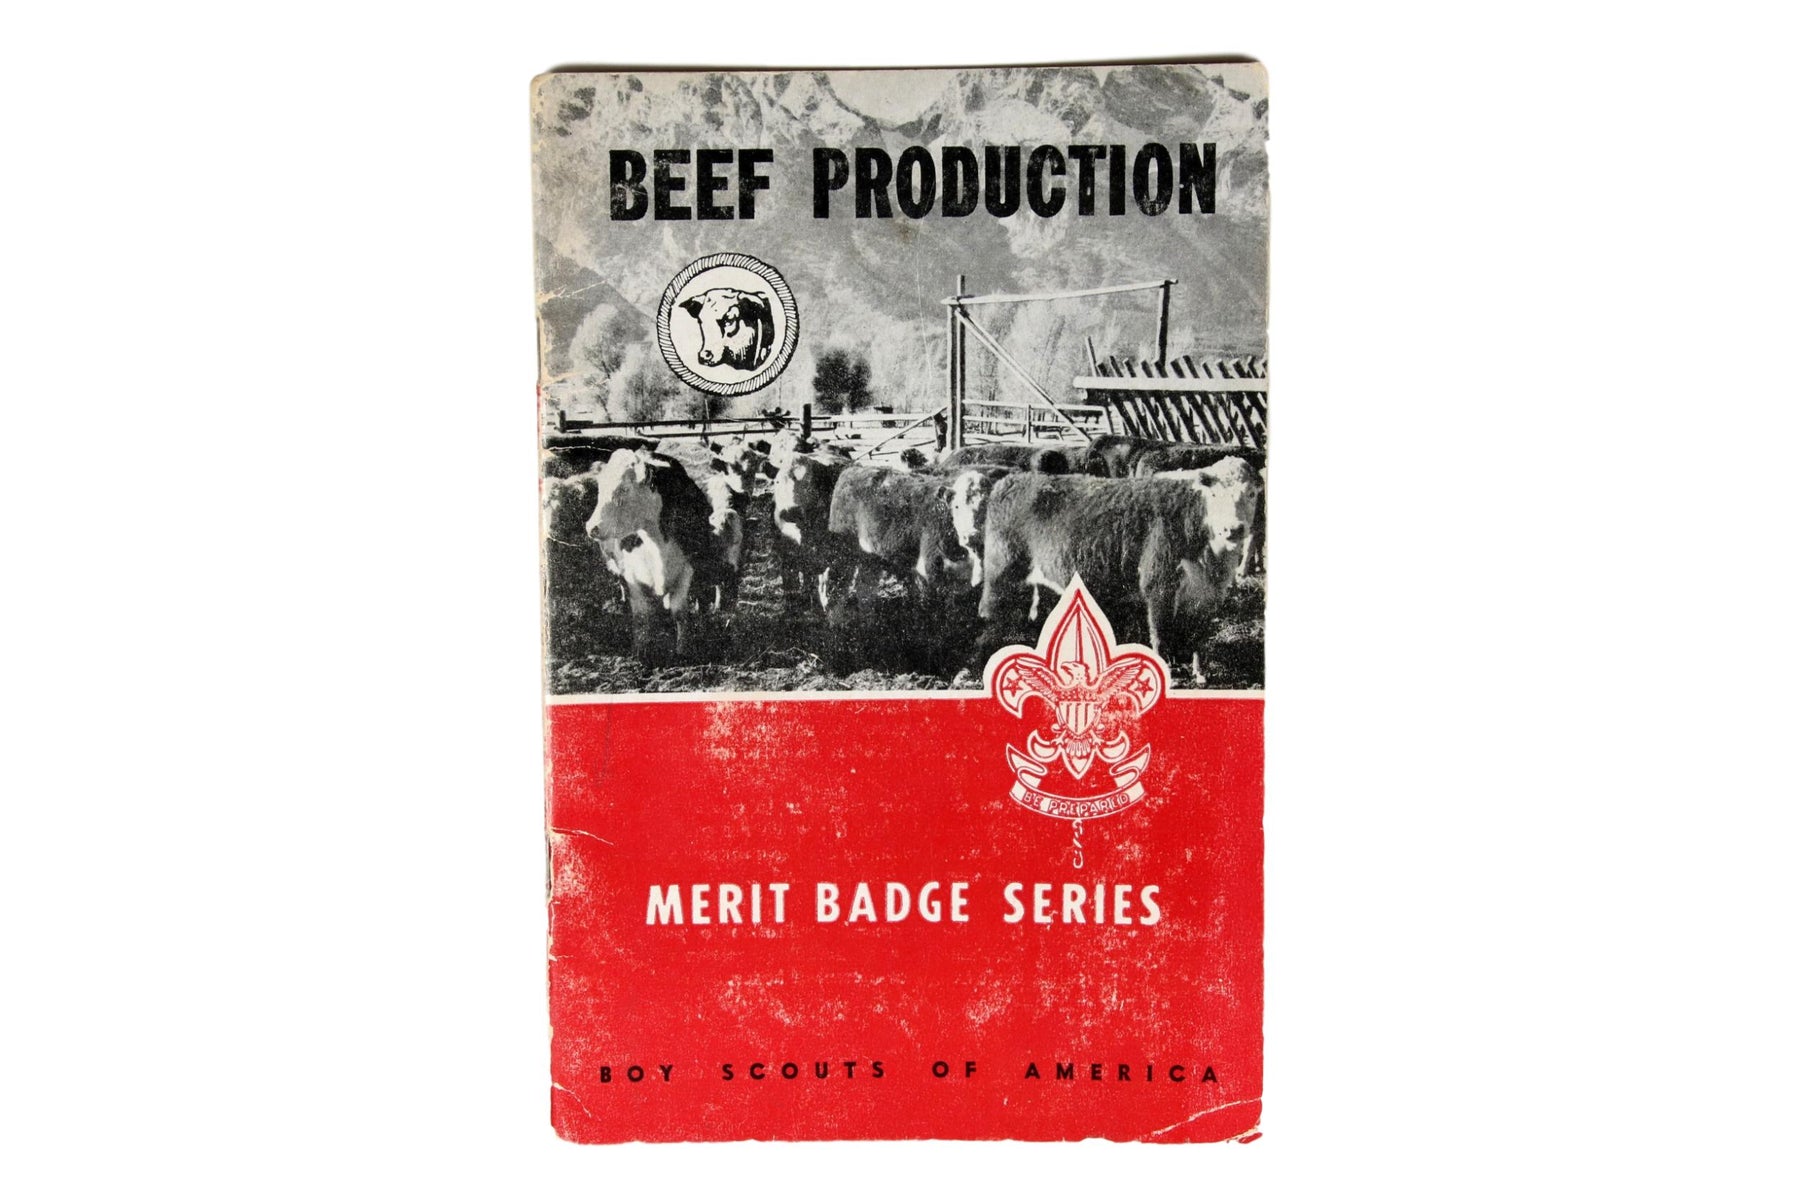 Beef Production MBP 1957